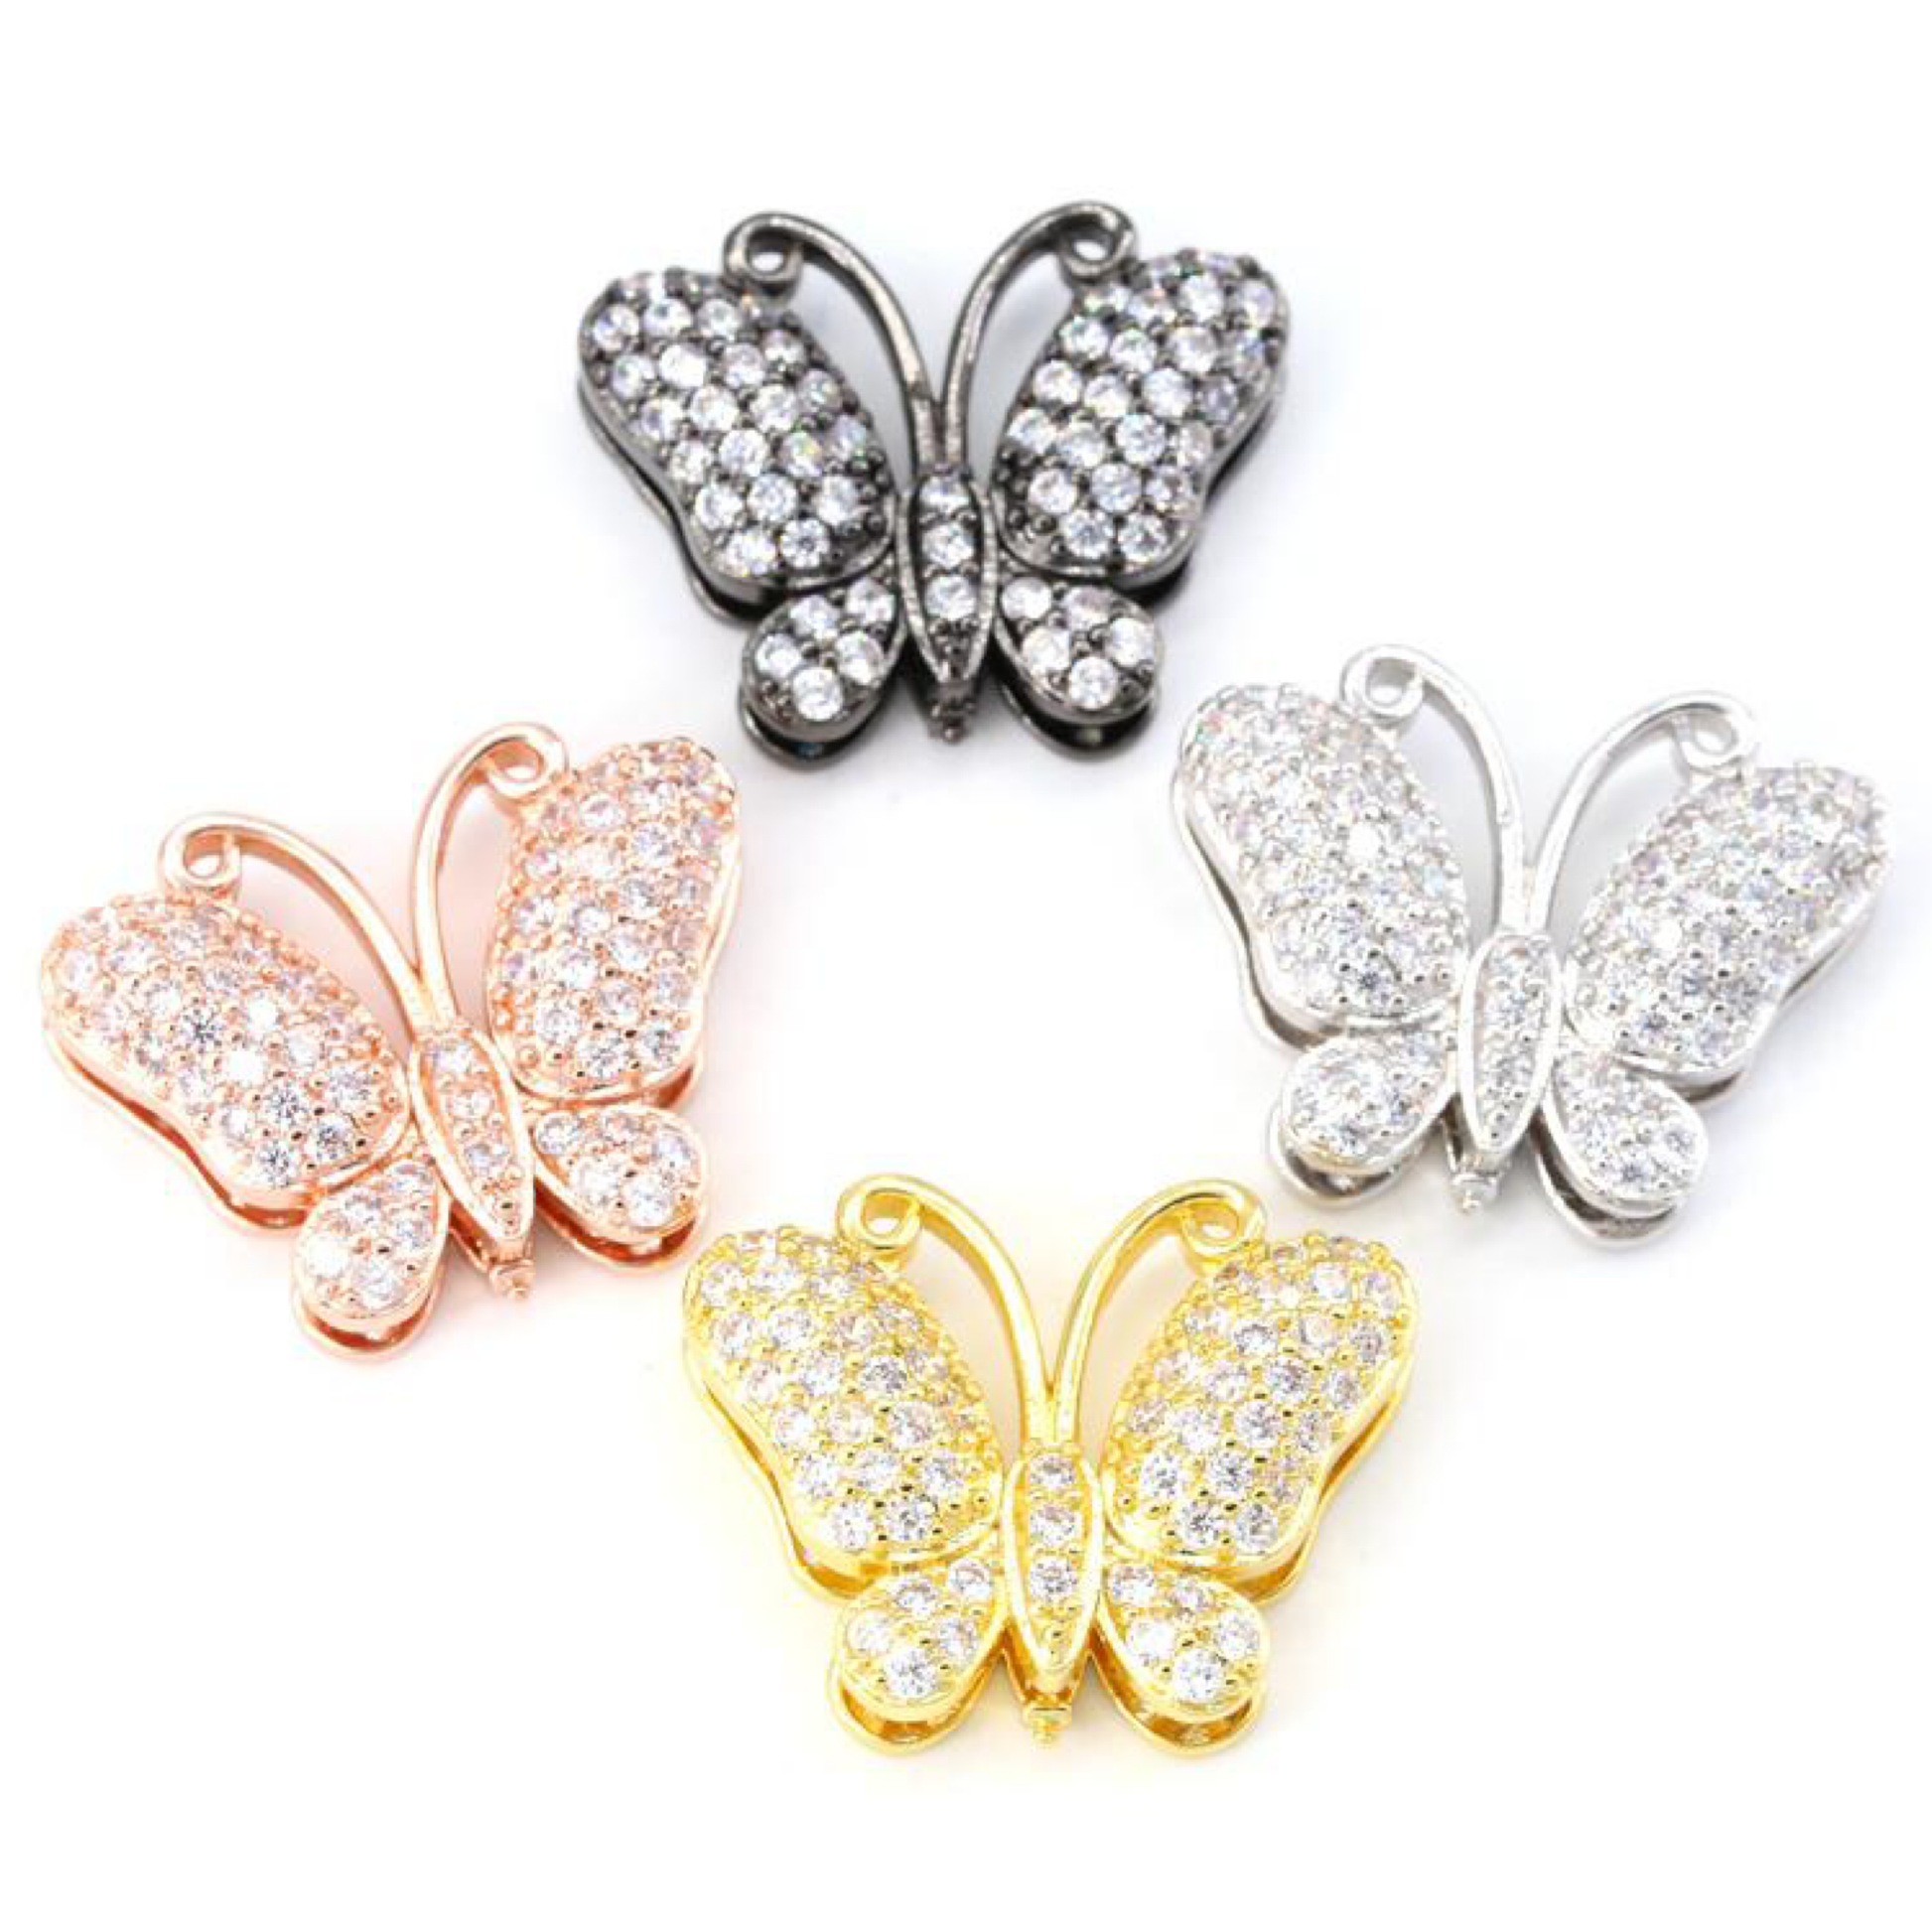 BUTTERFLY CHARMS LIFE COLLECTION - Unique Brazilian Jewelry (4507107426379)